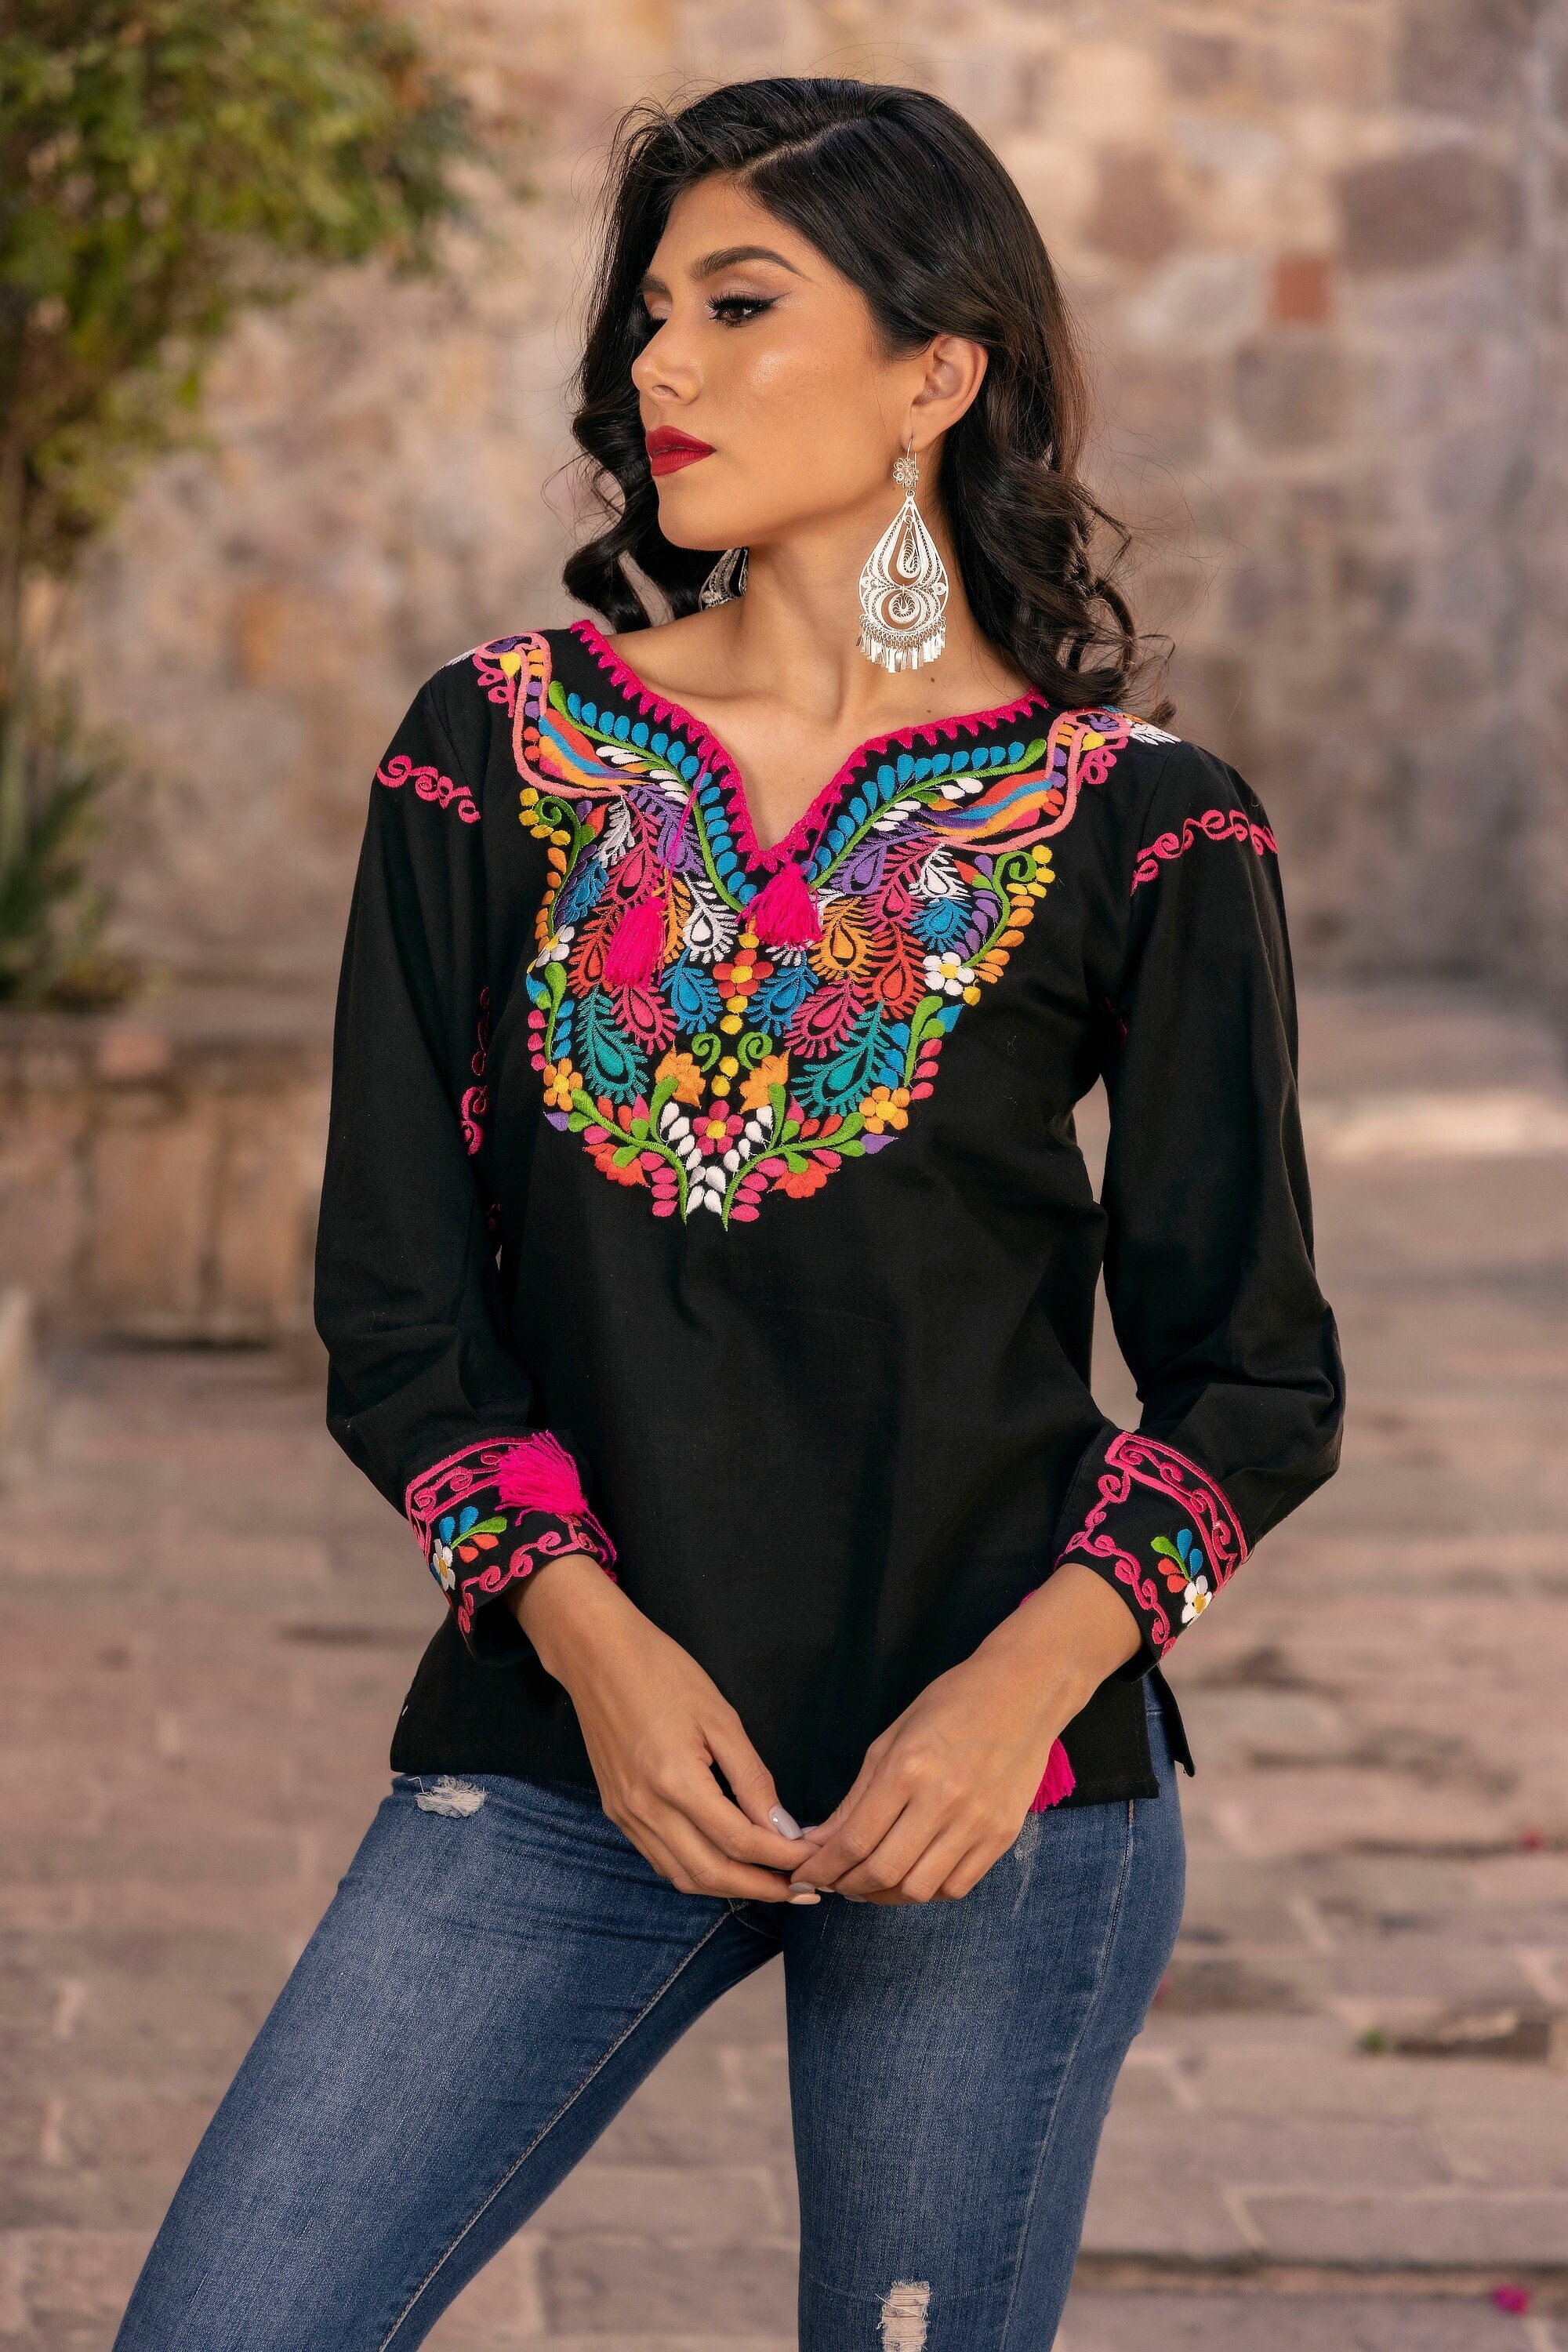 Embroidered Tops for Women Summer Boho Choth Mexican Bohemian Peasant Tops  Loose 3/4 Sleeves Shirts Blouse Top